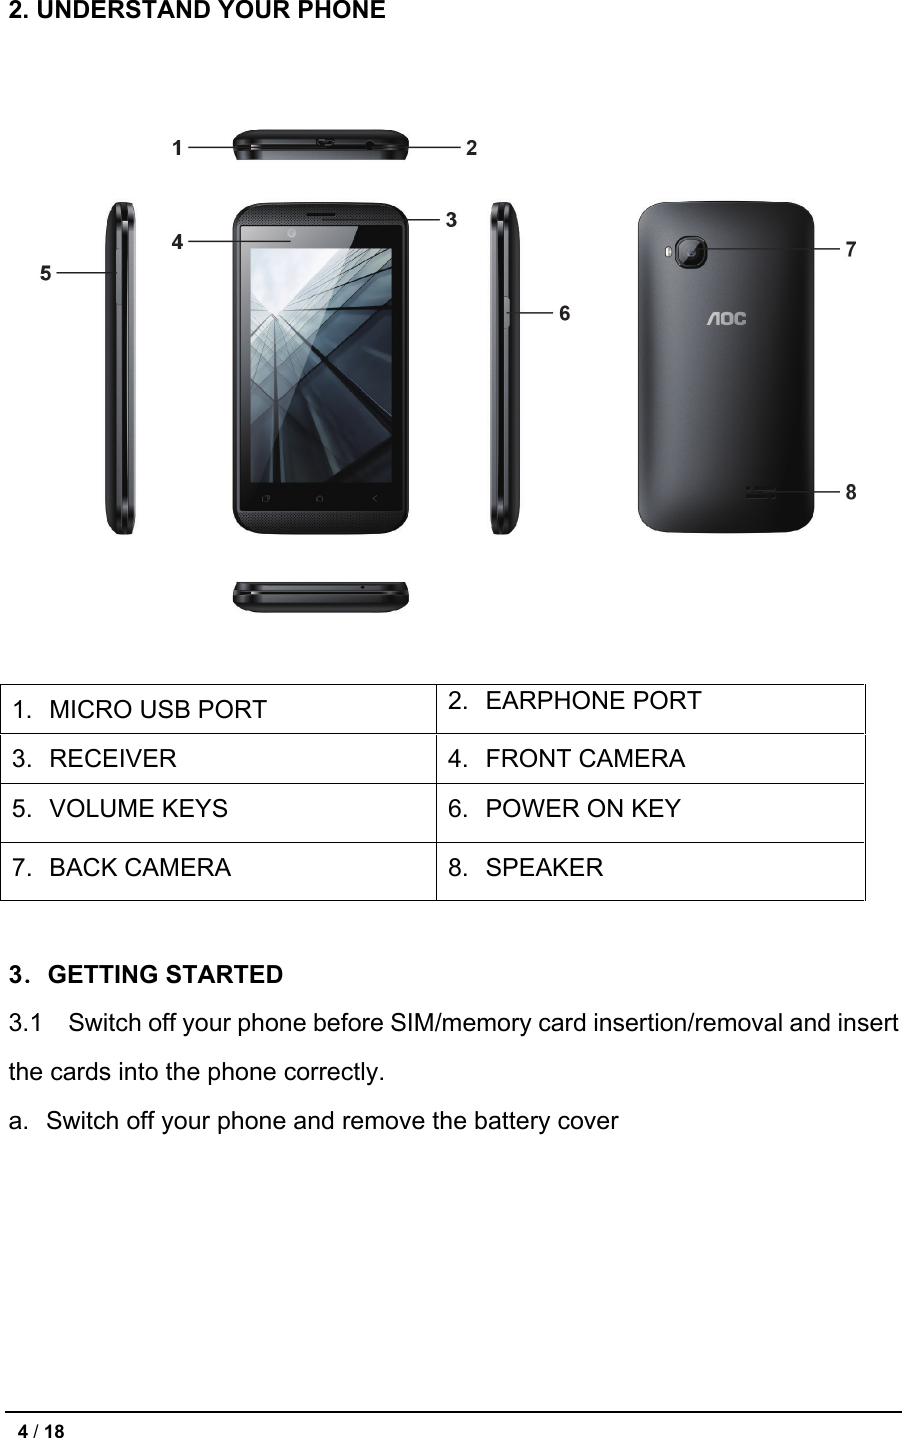 2. UNDERSTAND YOUR PHONE  1. MICRO USB PORT 2. EARPHONE PORT 3. RECEIVER 4. FRONT CAMERA 5. VOLUME KEYS 6. POWER ON KEY 7. BACK CAMERA 8. SPEAKER  3．GETTING STARTED  3.1  Switch off your phone before SIM/memory card insertion/removal and insert the cards into the phone correctly. a. Switch off your phone and remove the battery cover  4 / 18   